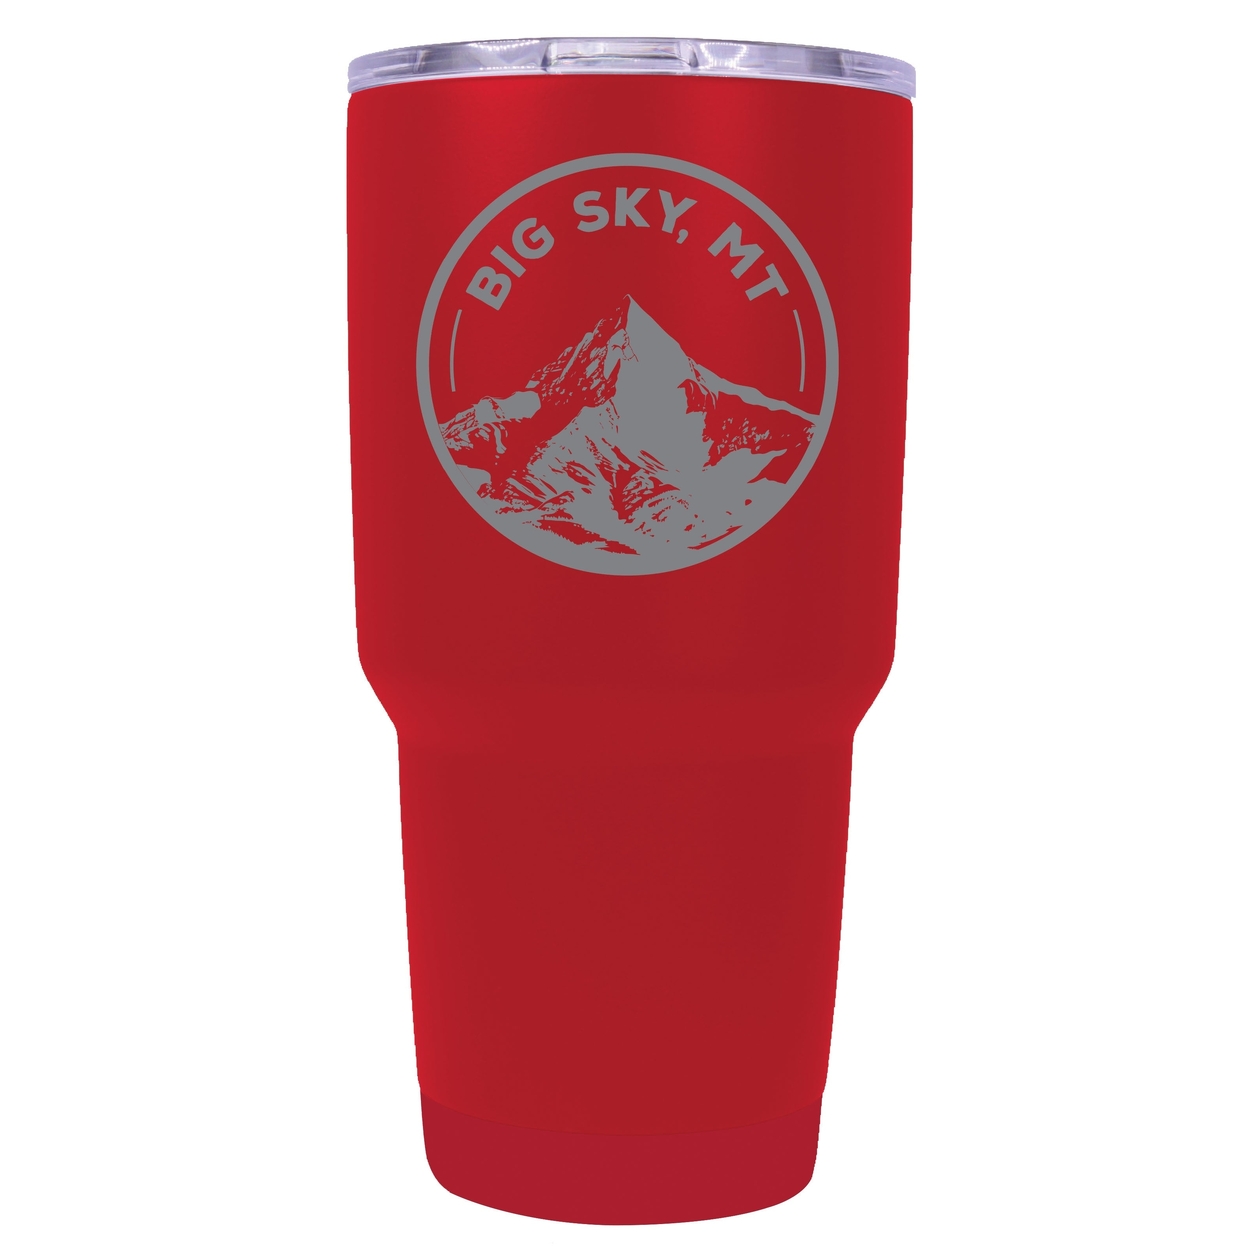 Big Sky Montana Souvenir 24 Oz Engraved Insulated Stainless Steel Tumbler - Coral,,2-Pack